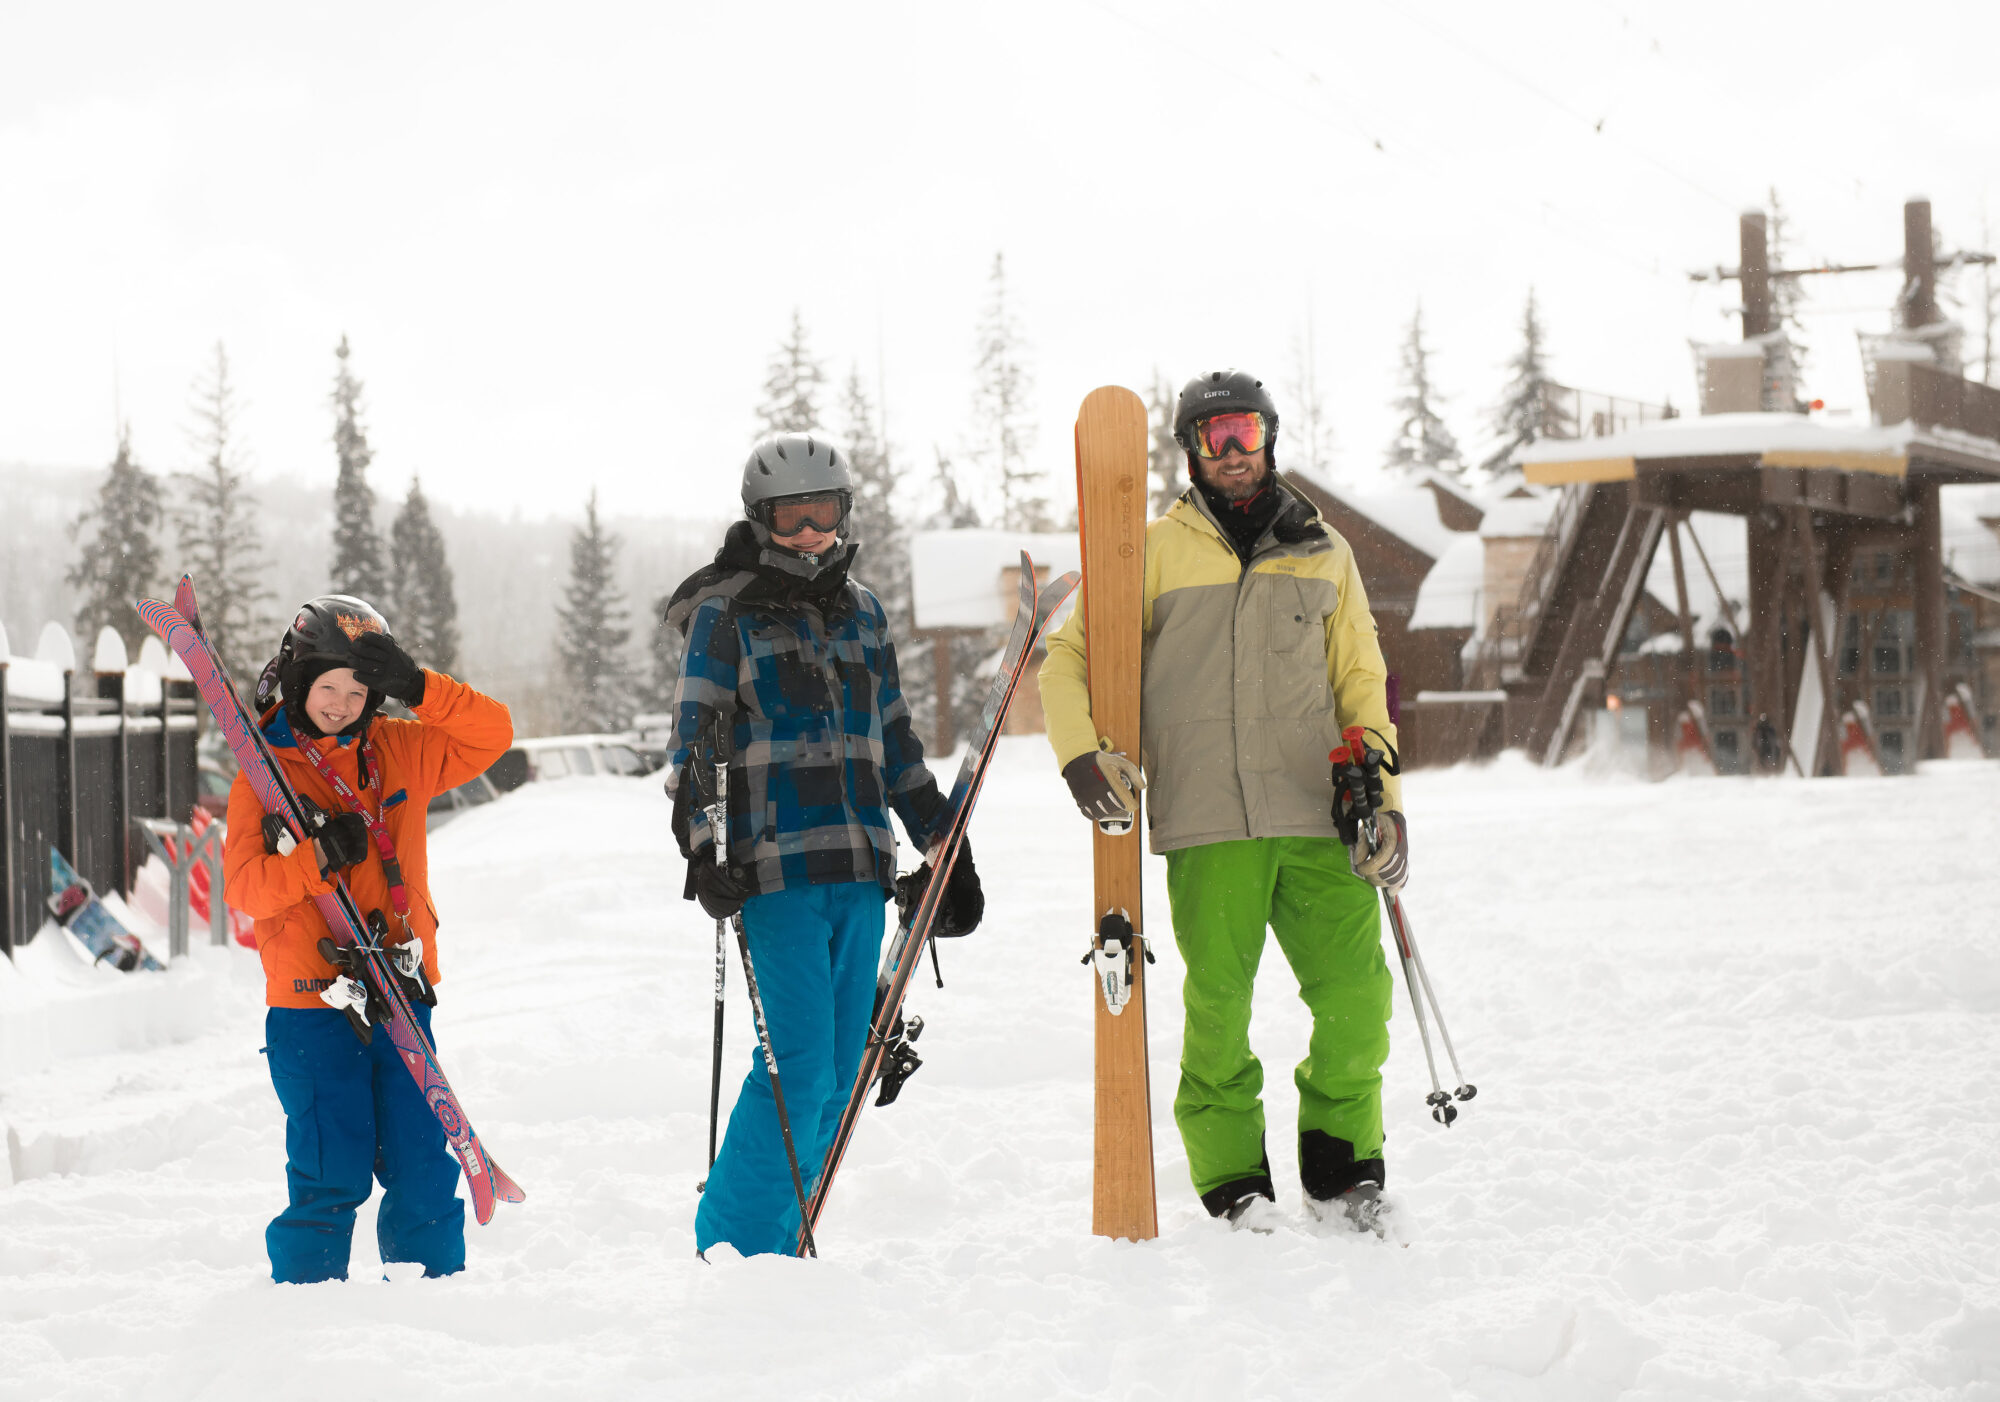 A family smiles with their skis in front of the ski lift at the base area